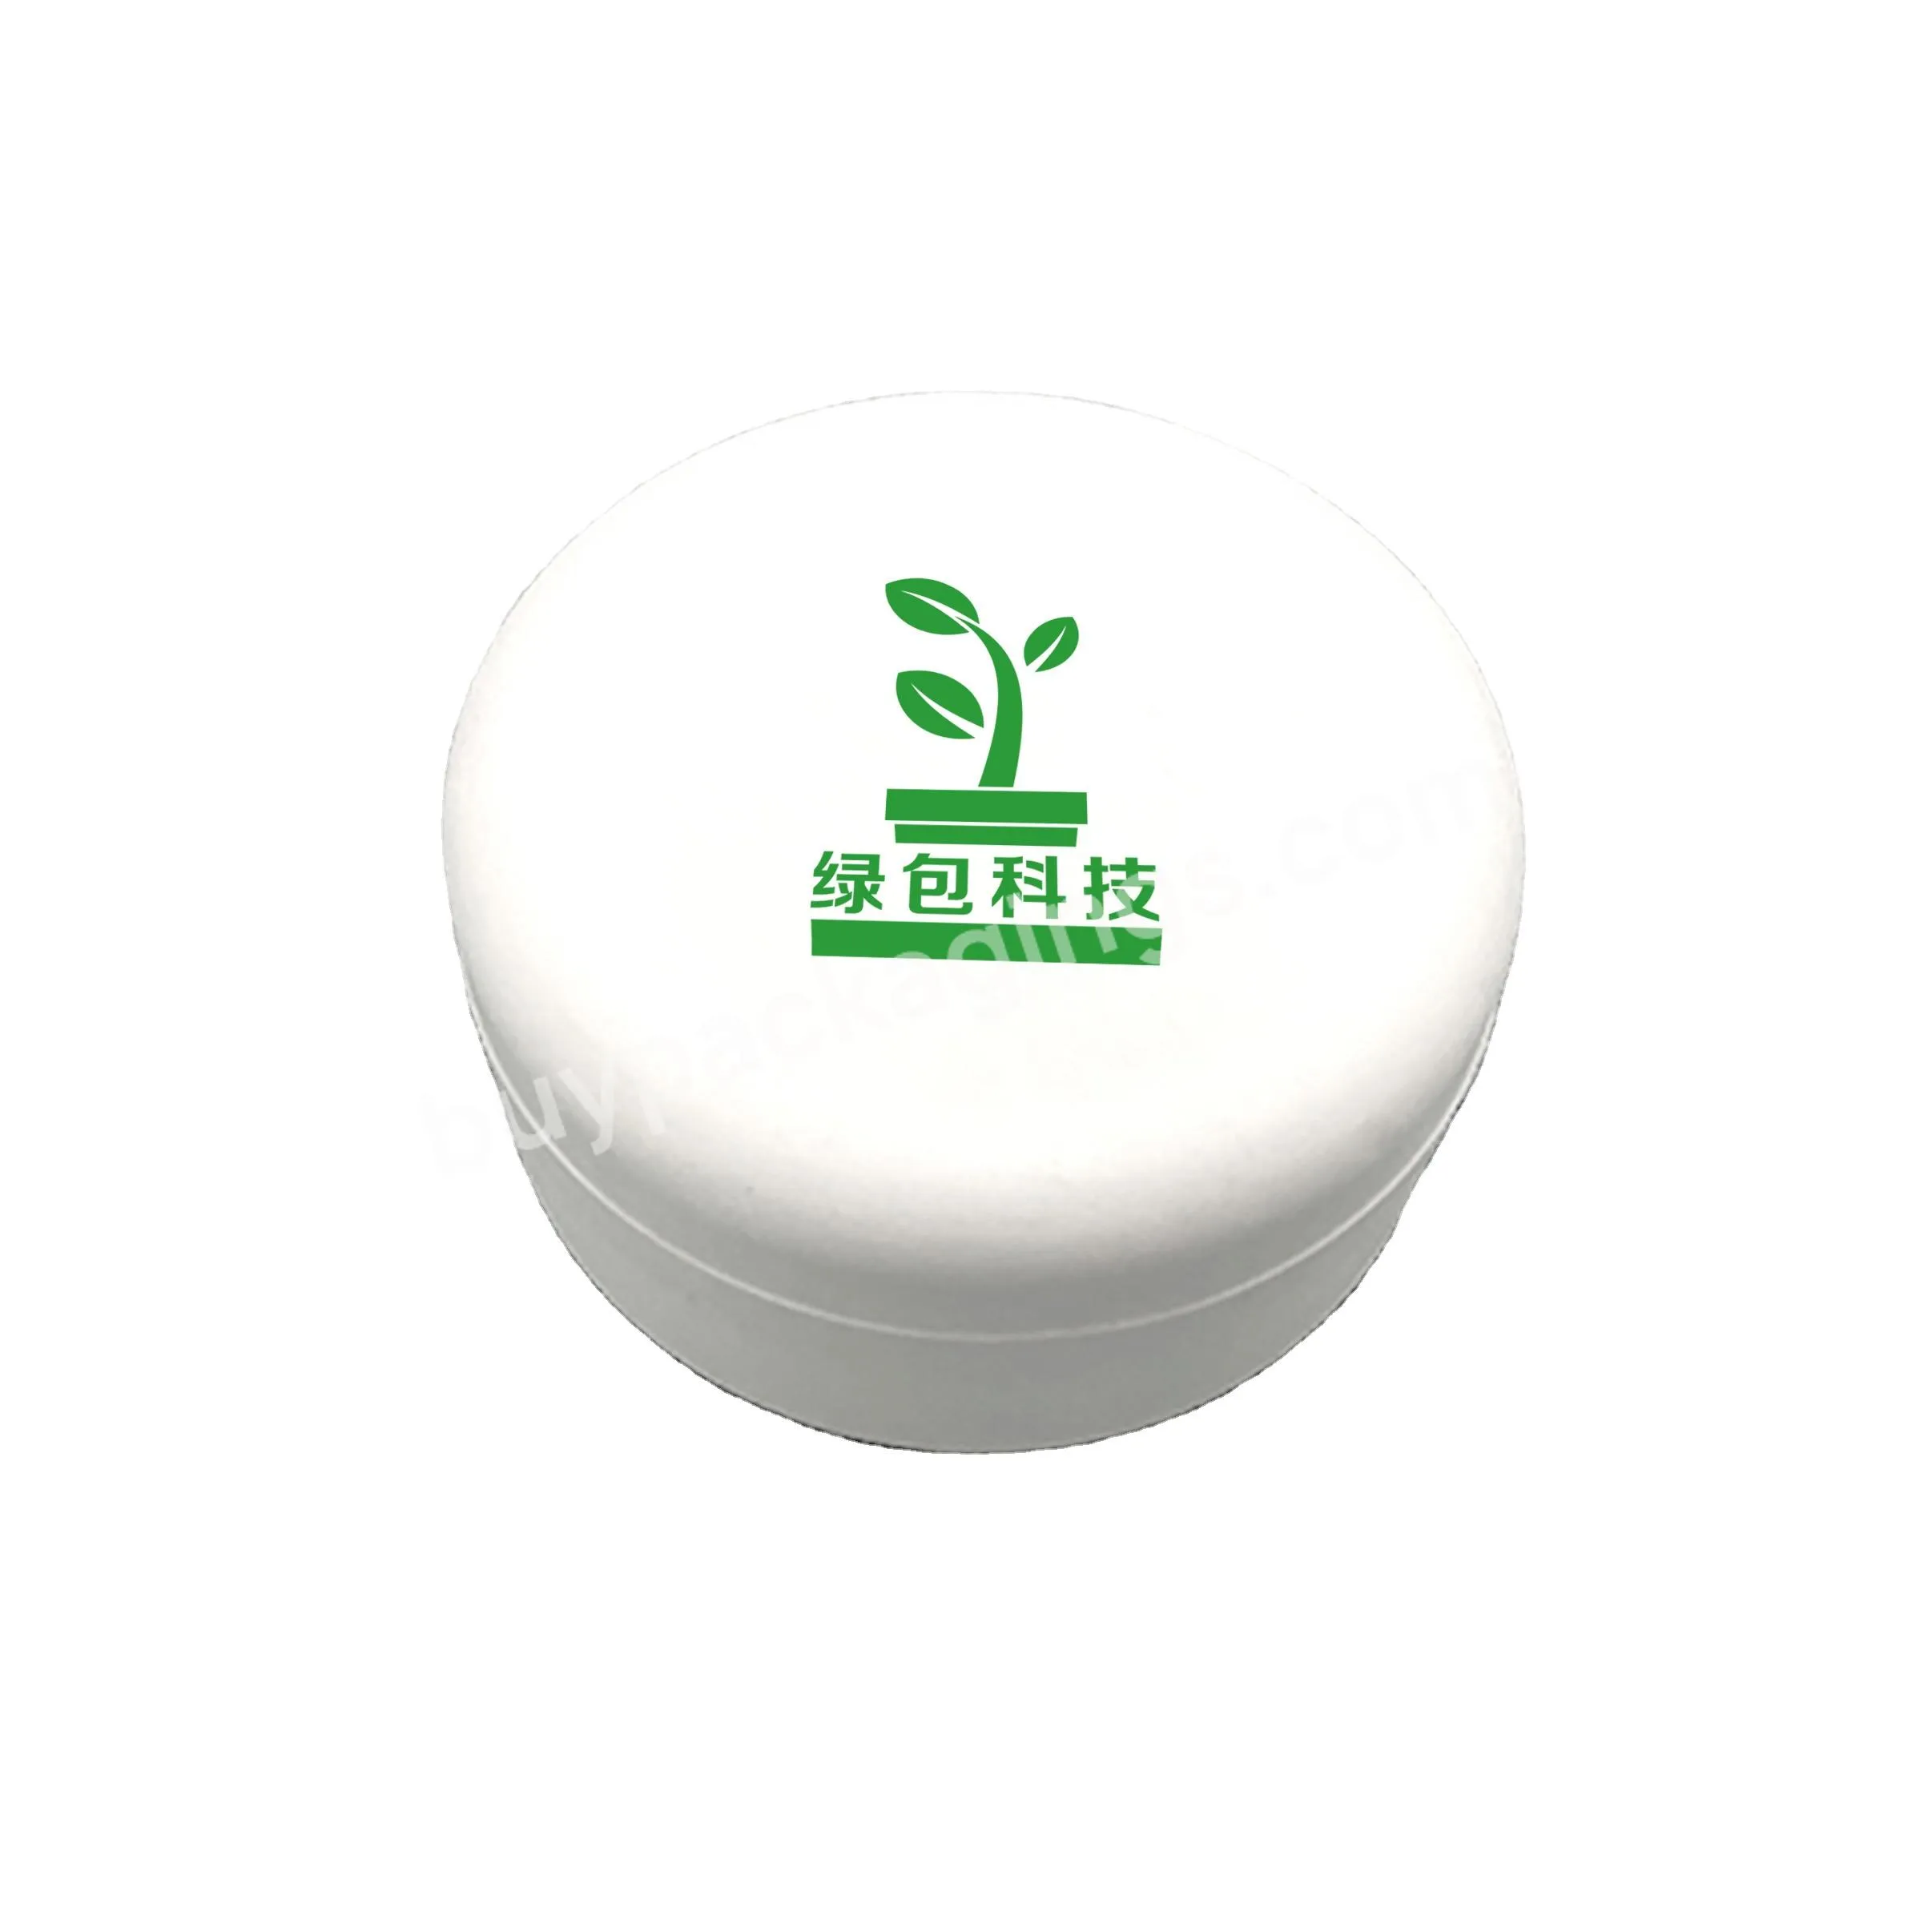 Good Selling Wet Press Foil Stamping Sugarcane Fancy Talcum Powder Paper Molded Pulp Box And Container Packaging - Buy Packaging Skincare Box,Skin Care Insert Tray,100% Biodegradable Recycled Popular Skincare Packaging Paper Pulp Tray.